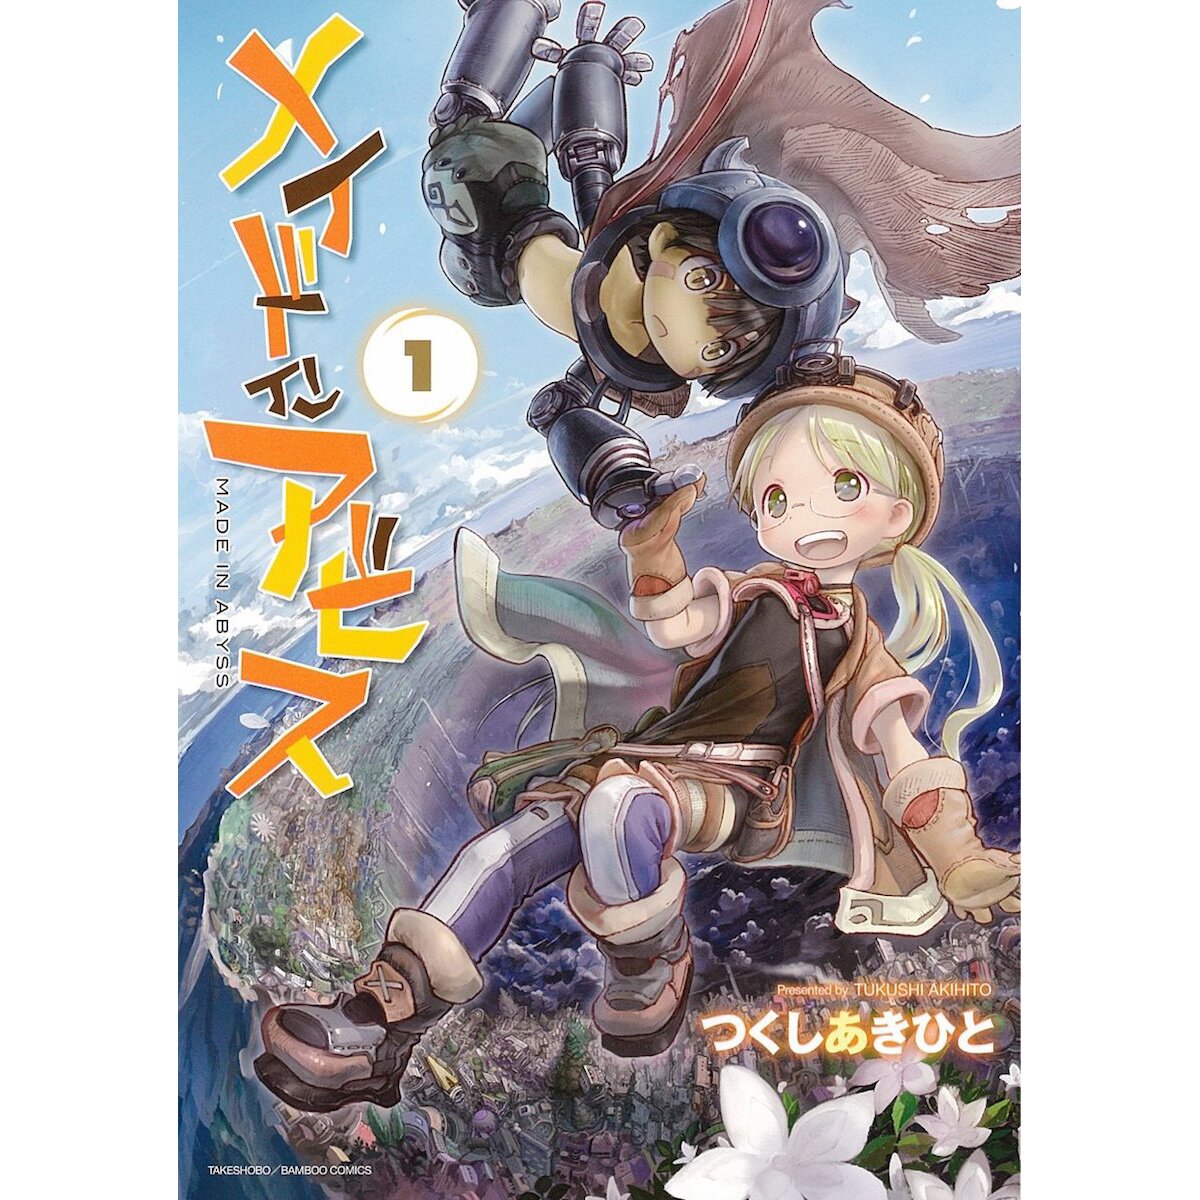 I watched an anime: Made in Abyss — The Tokyo 5